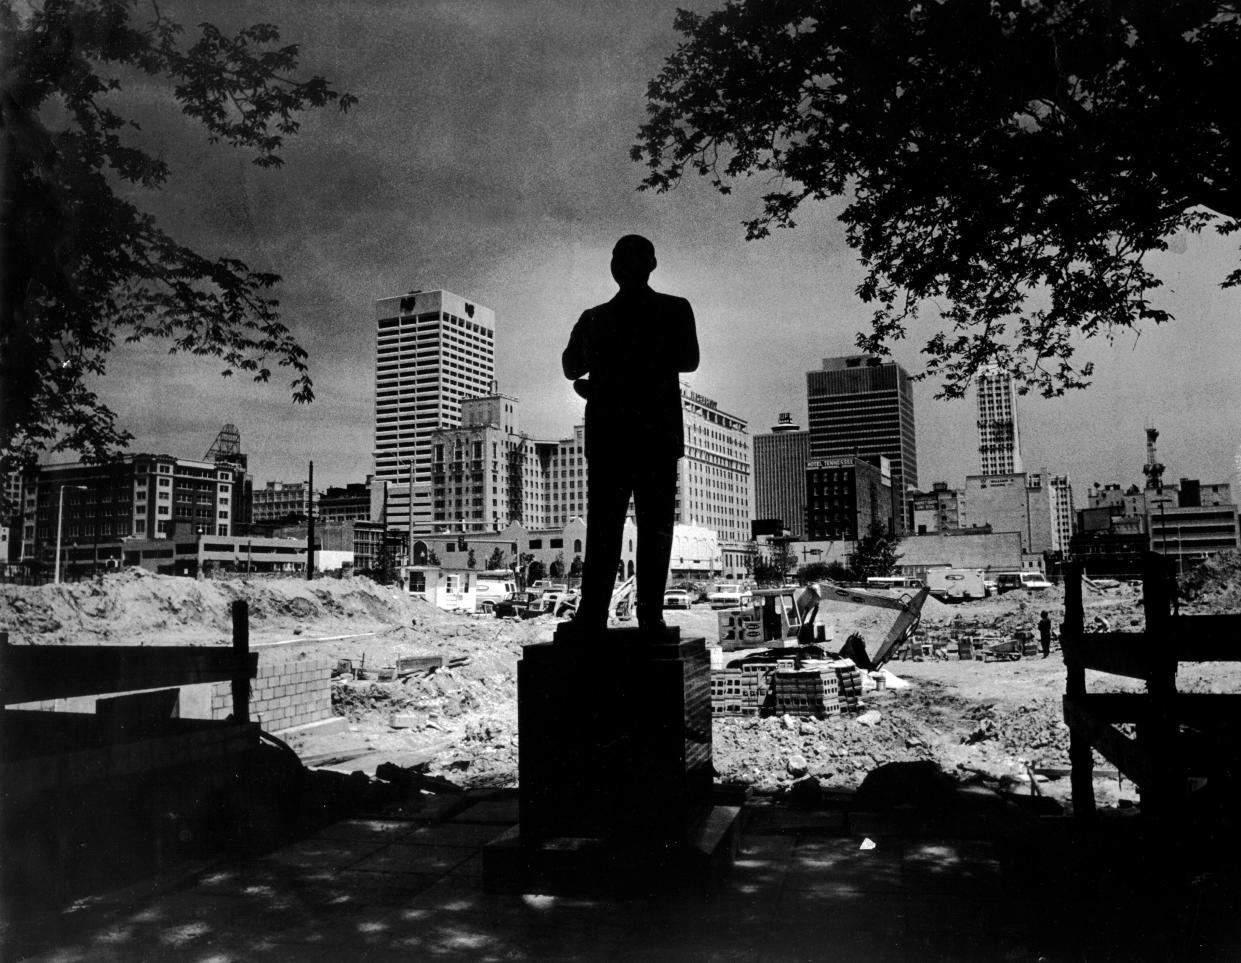 May 10, 1982: The statue of WC Handy is surrounded by the construction of a stage and seating area at Handy Park on Beale Street in Memphis. Barney Sellers / The Commercial Appeal